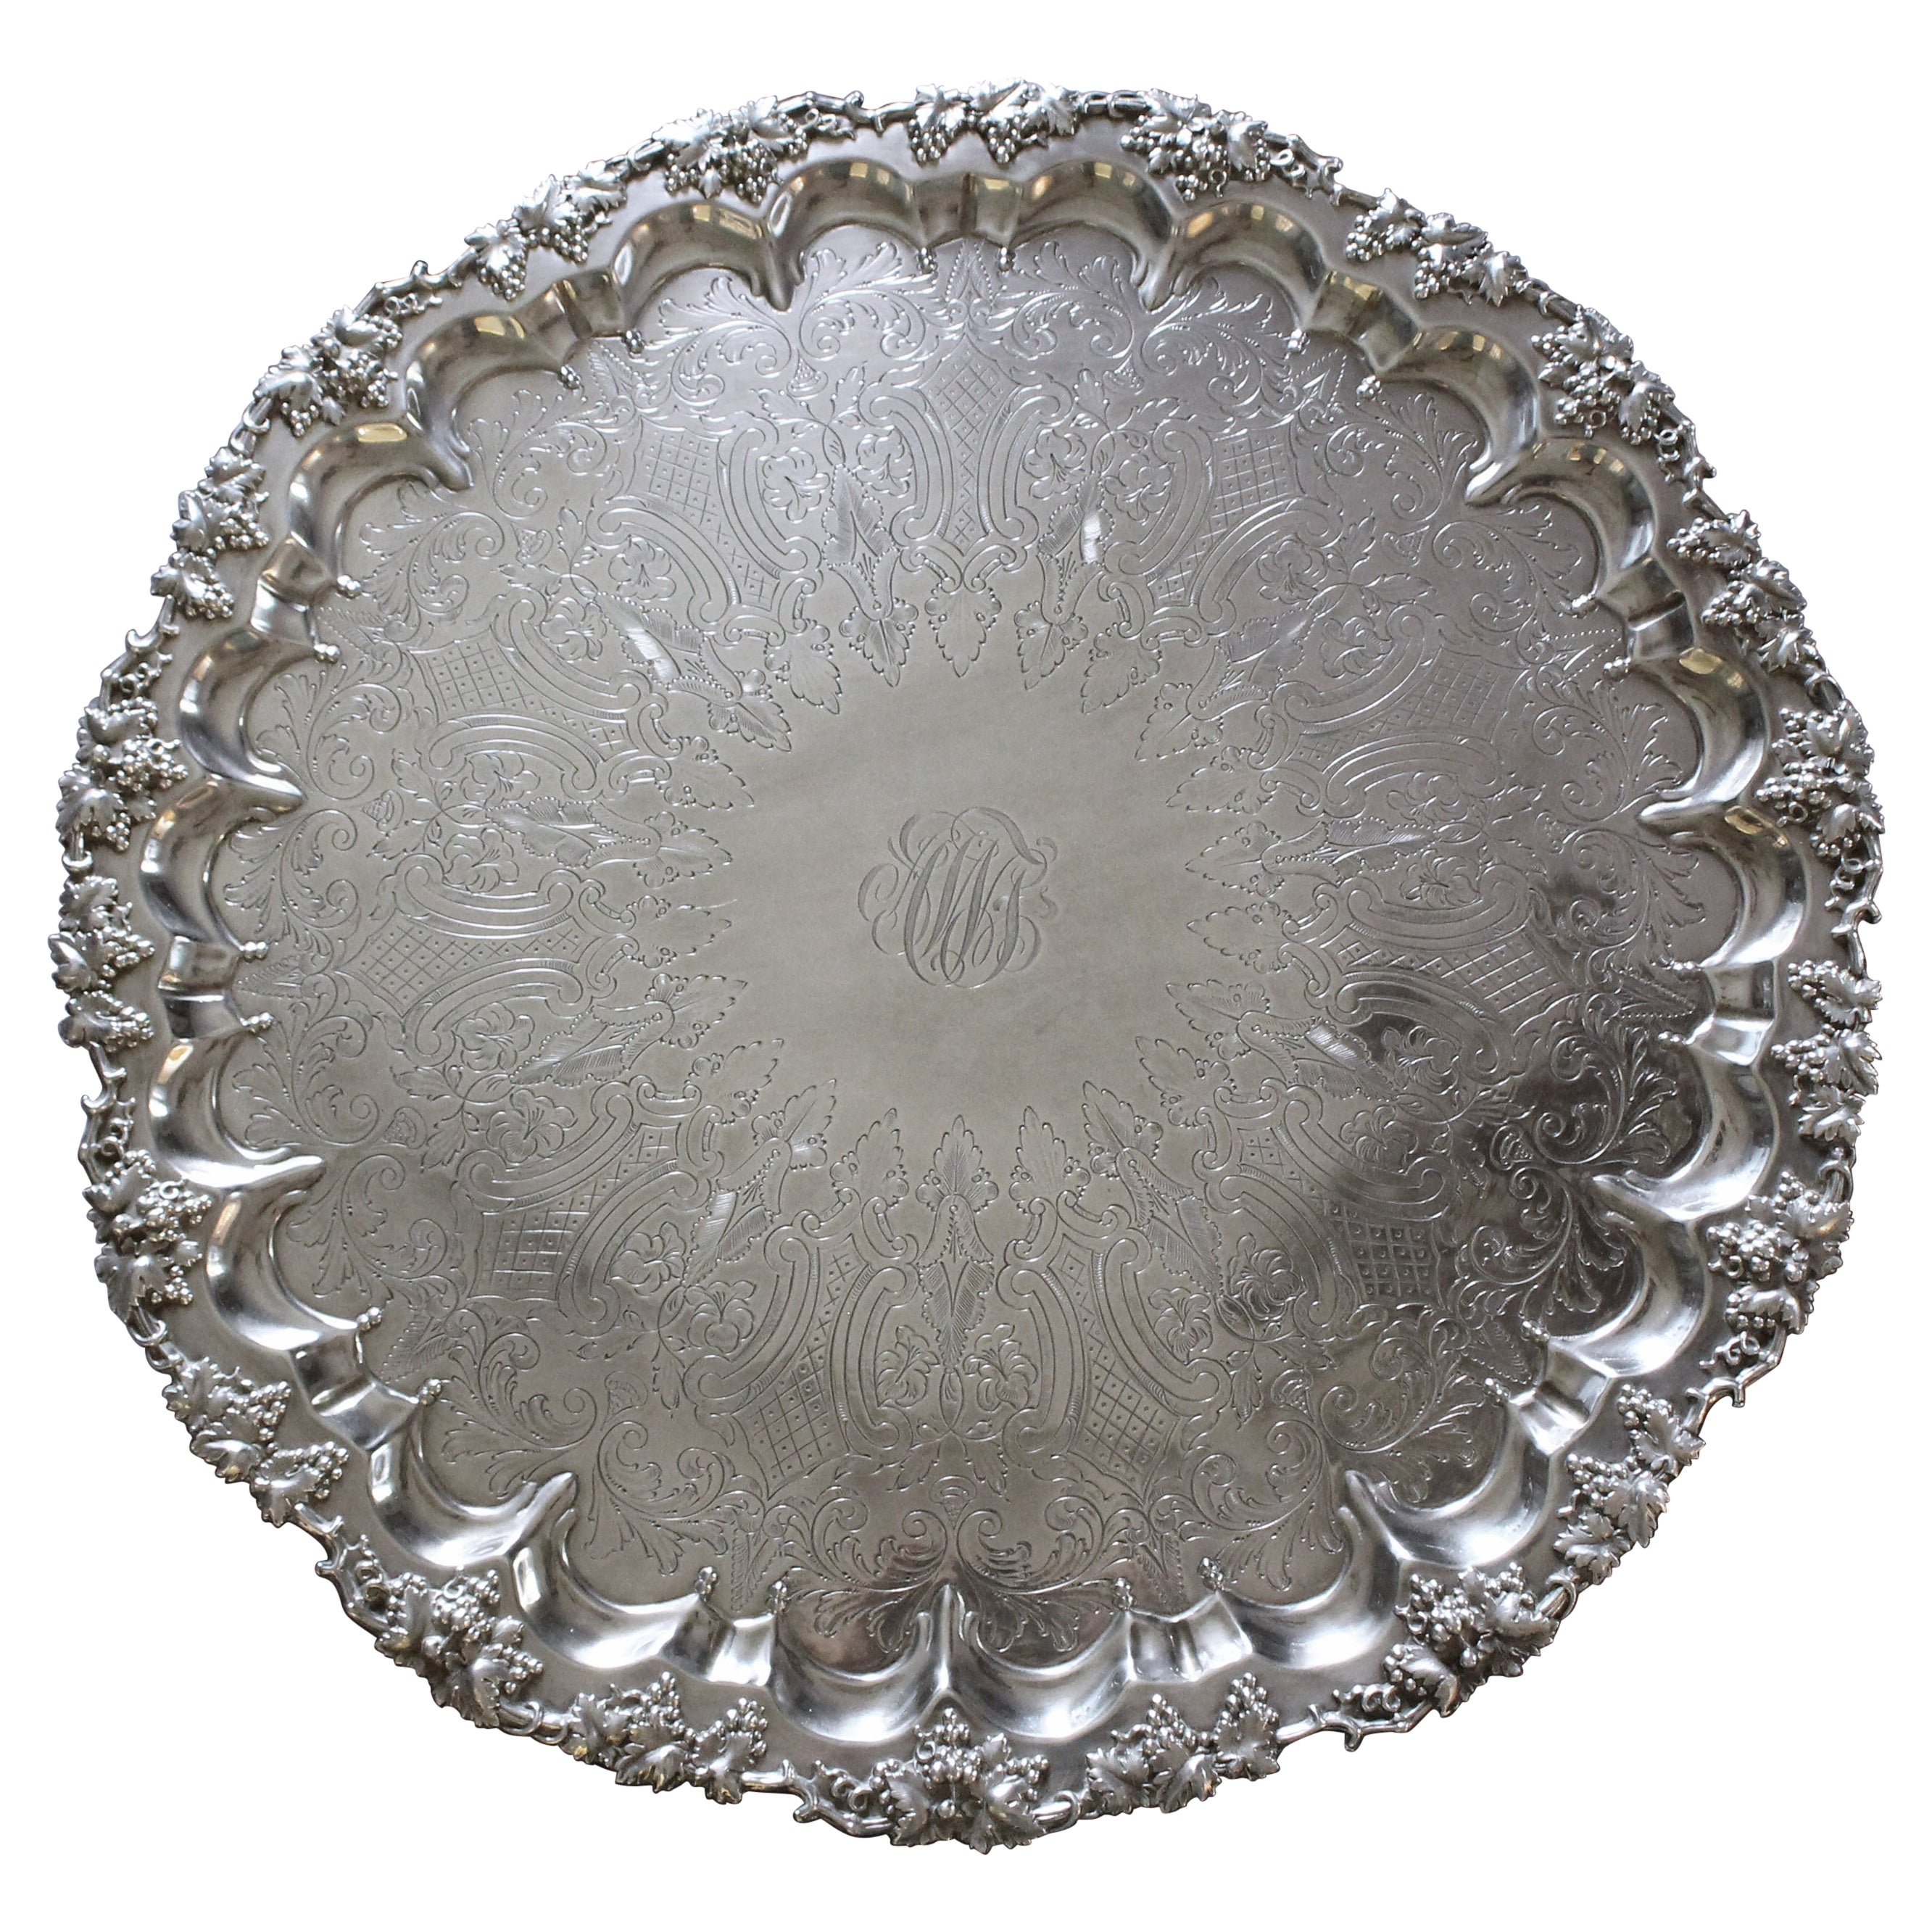 c. 1920 Electroplated Nickel Silver Salver by S.B. & Co.